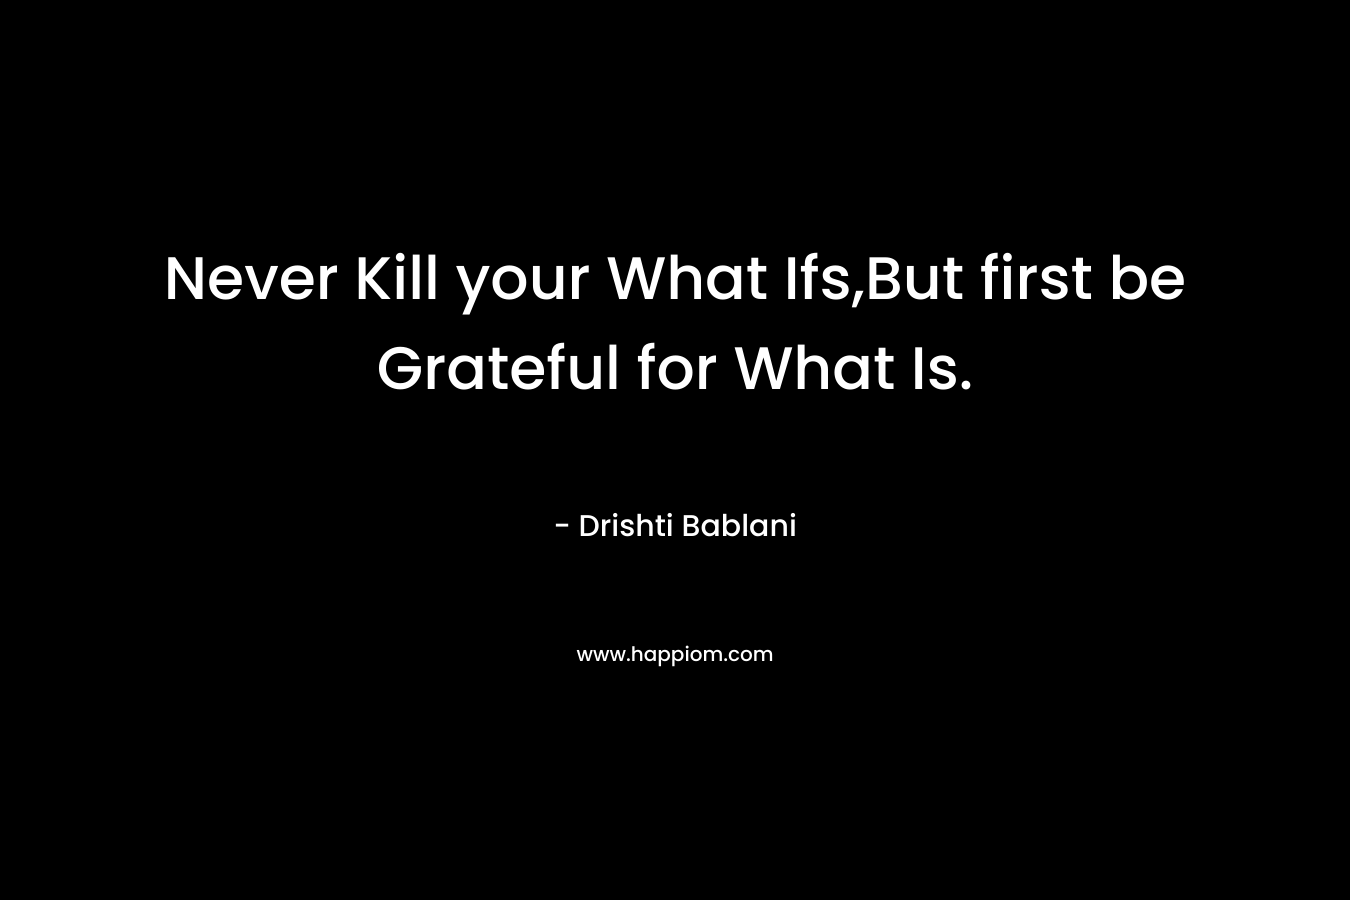 Never Kill your What Ifs,But first be Grateful for What Is.